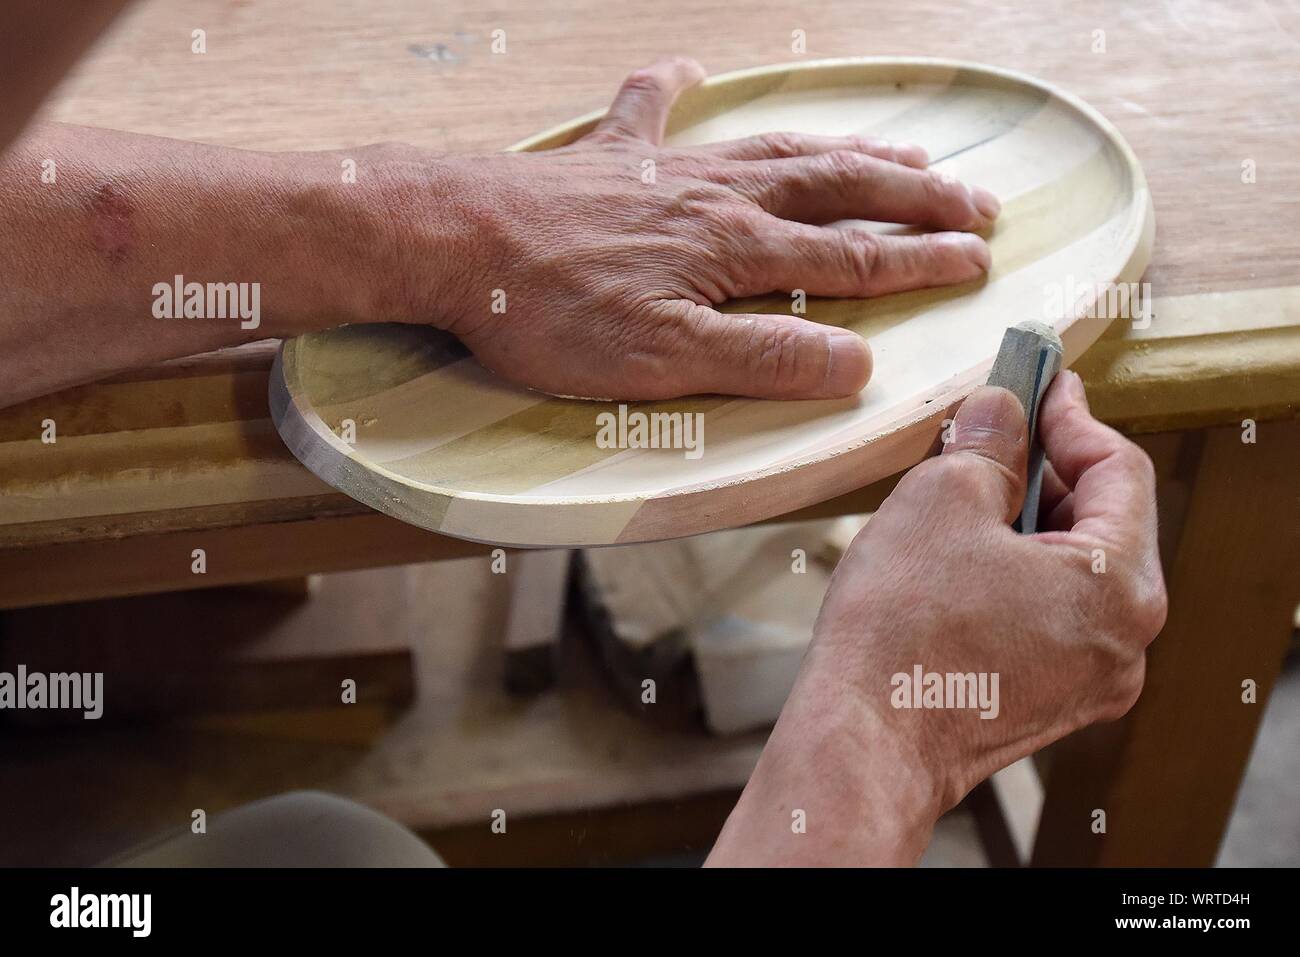 Cropped Image Of Craftsperson Shaping Wood At Workshop Stock Photo